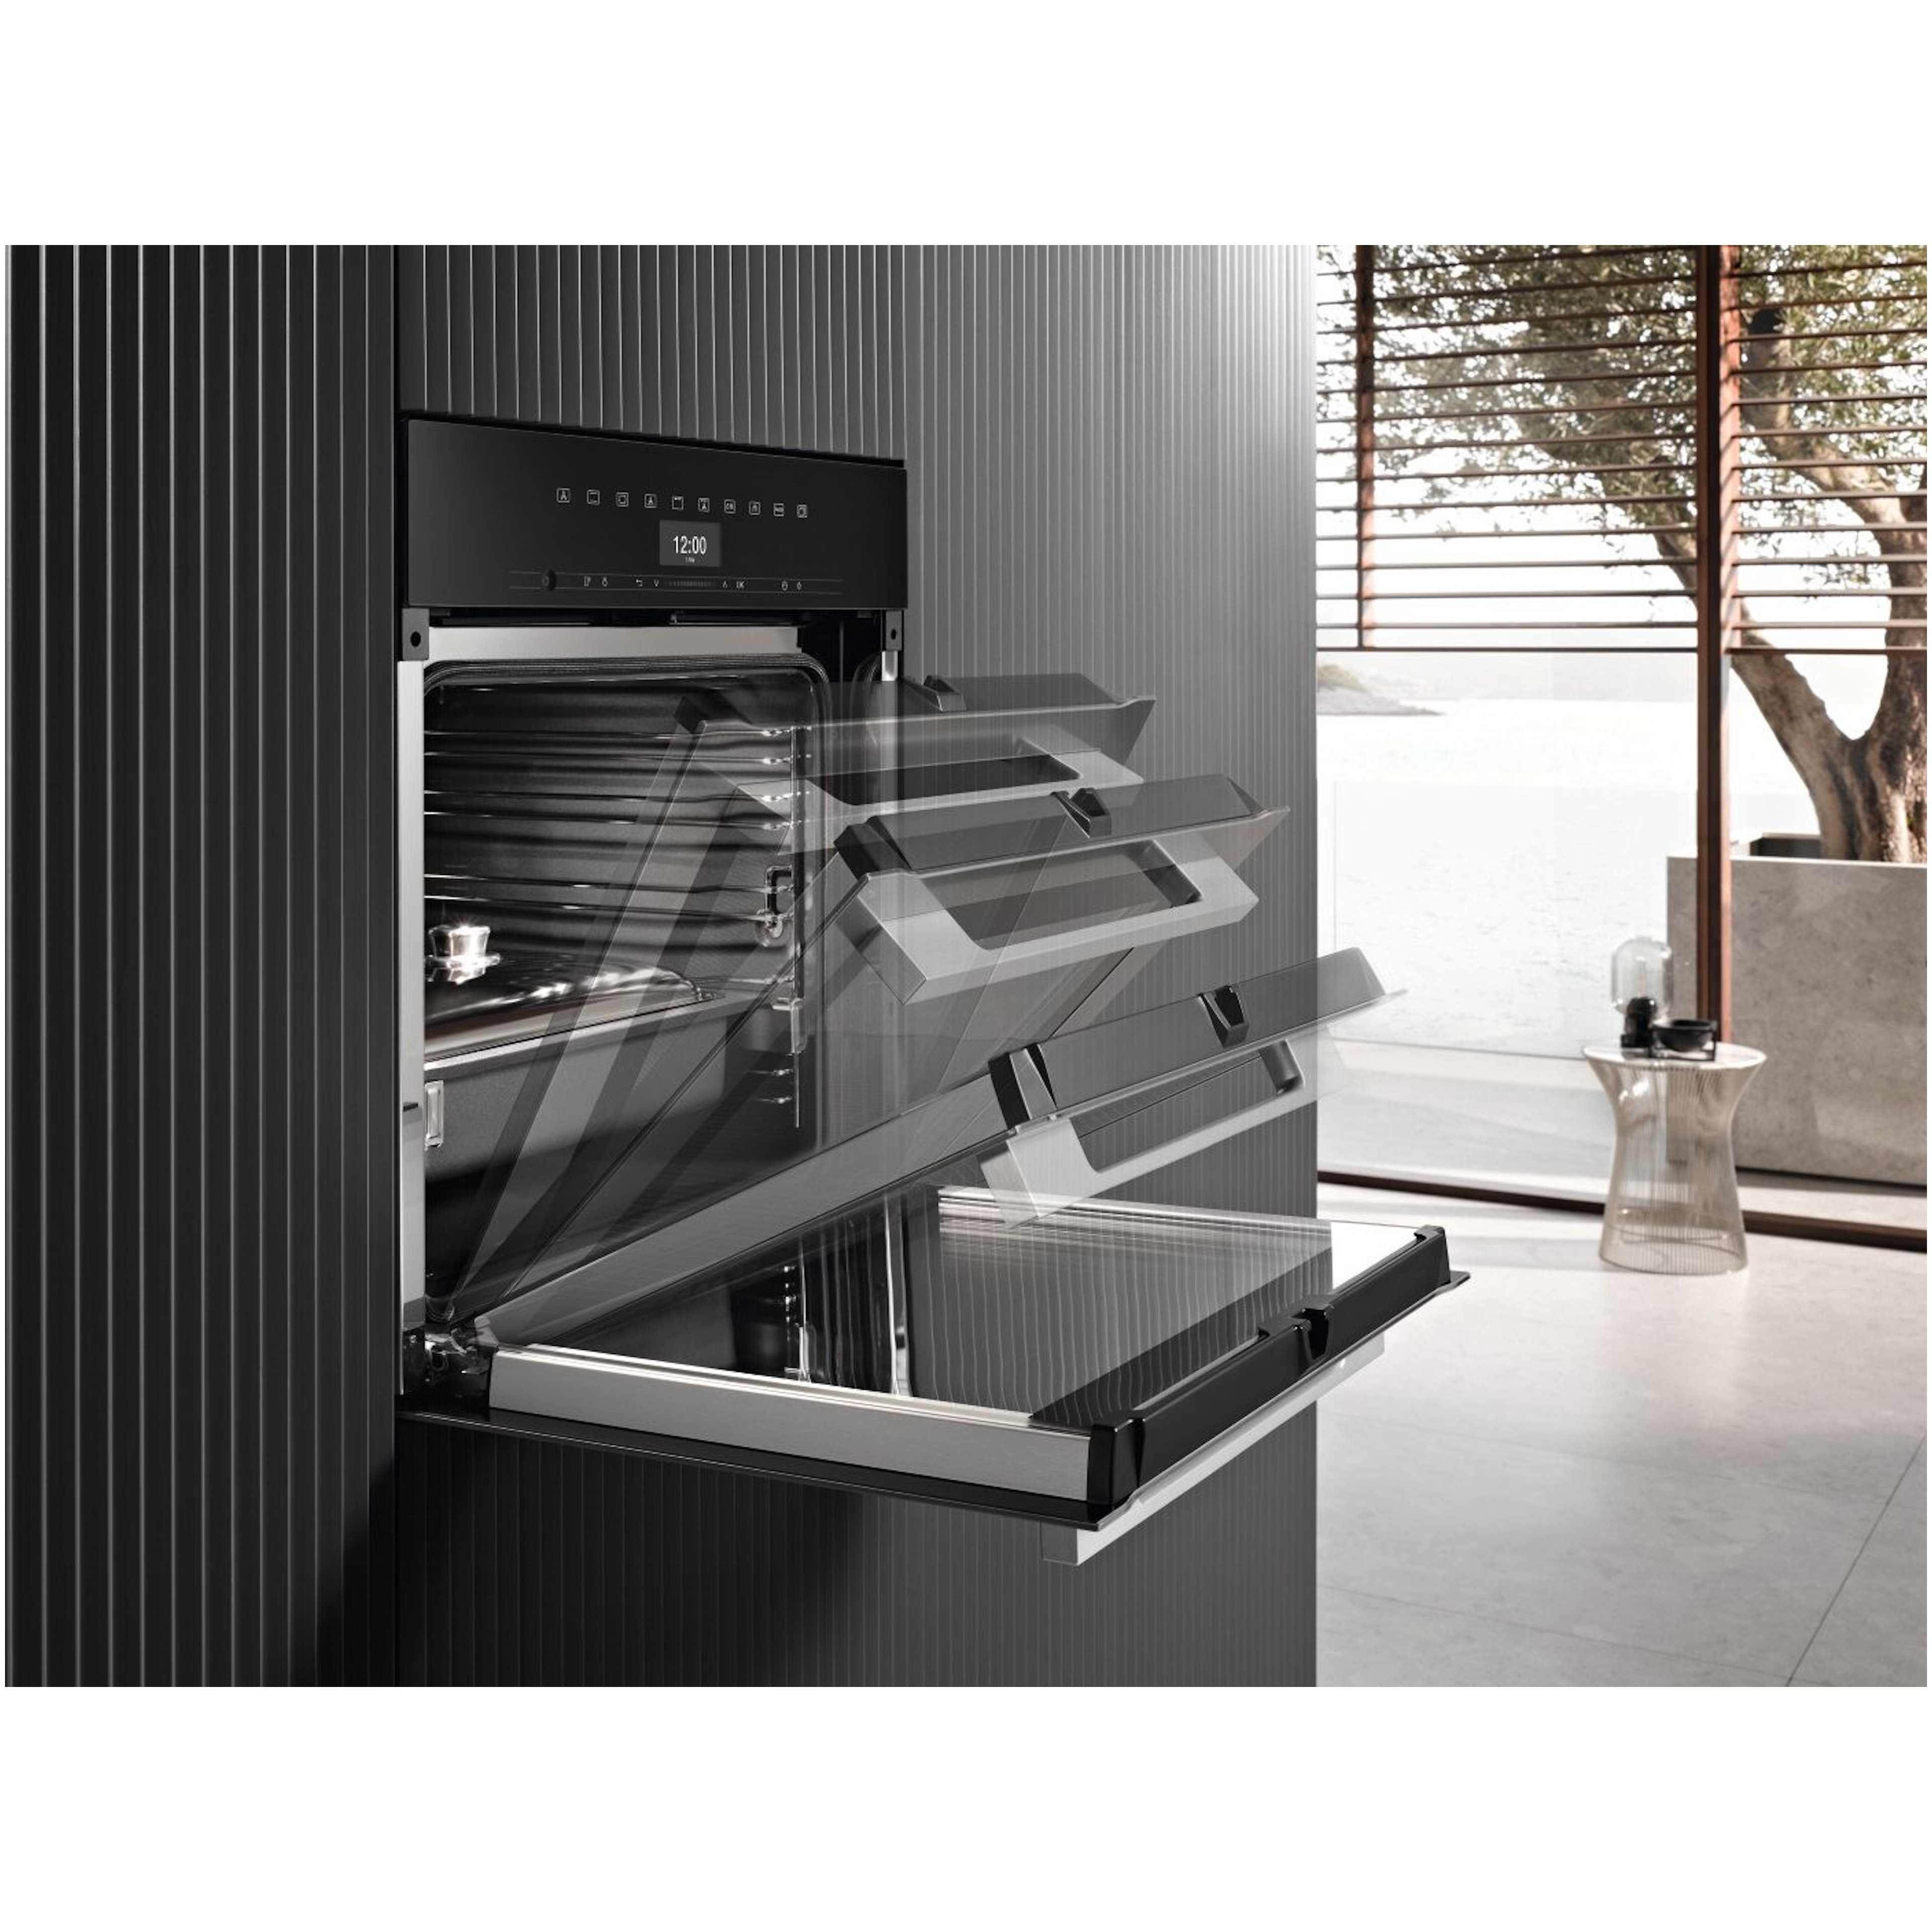 Miele oven H 7364 BP afbeelding 3